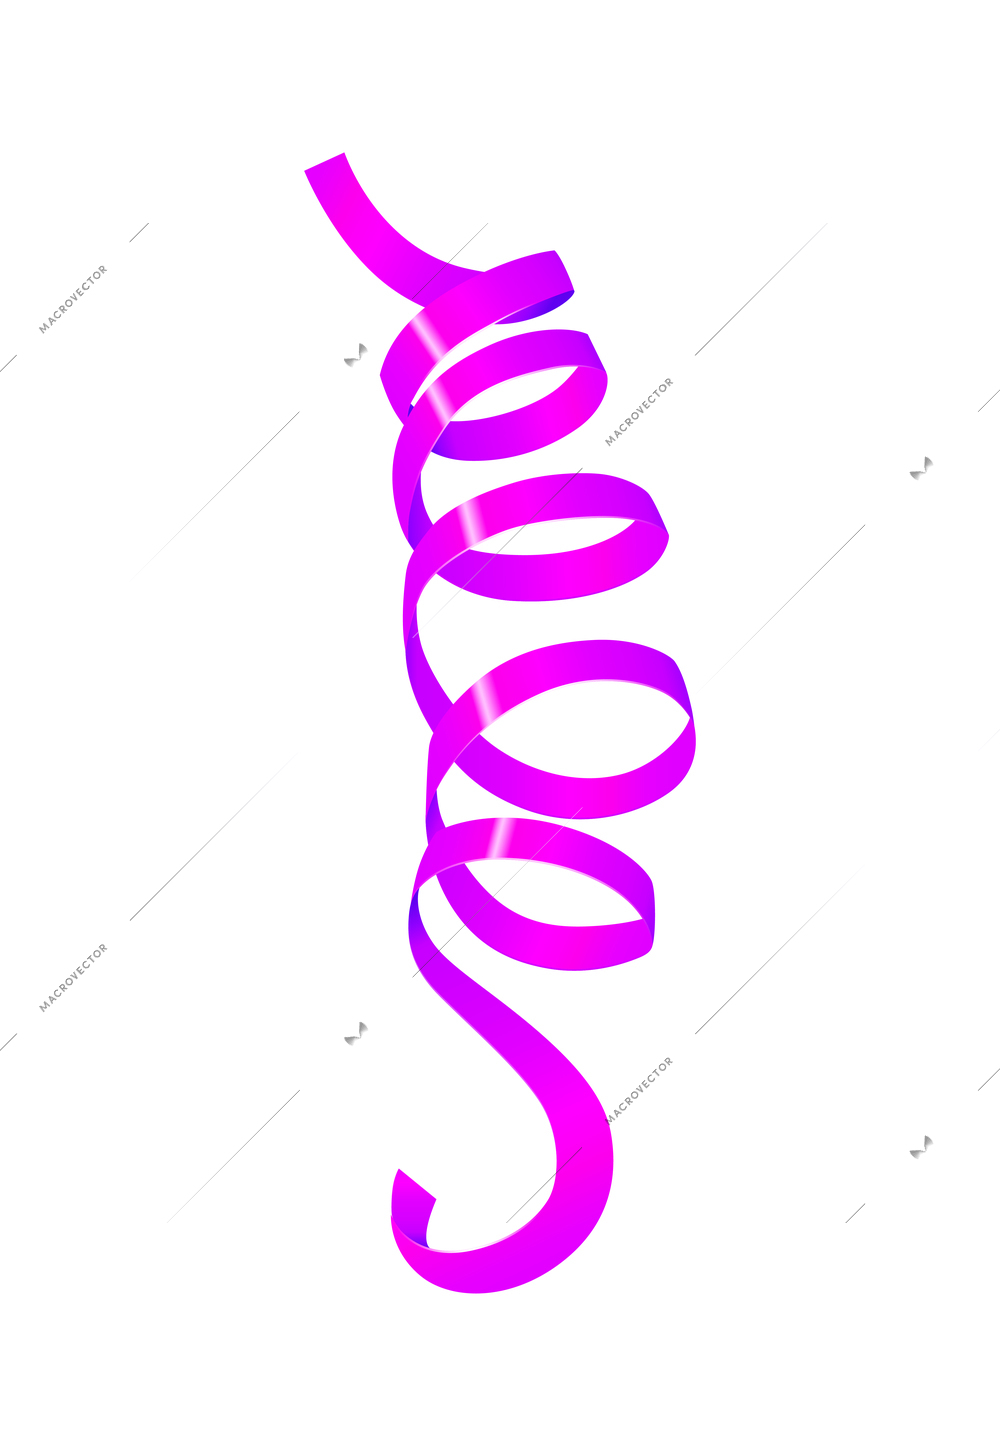 Realistic twisted color serpentine on white background vector illustration